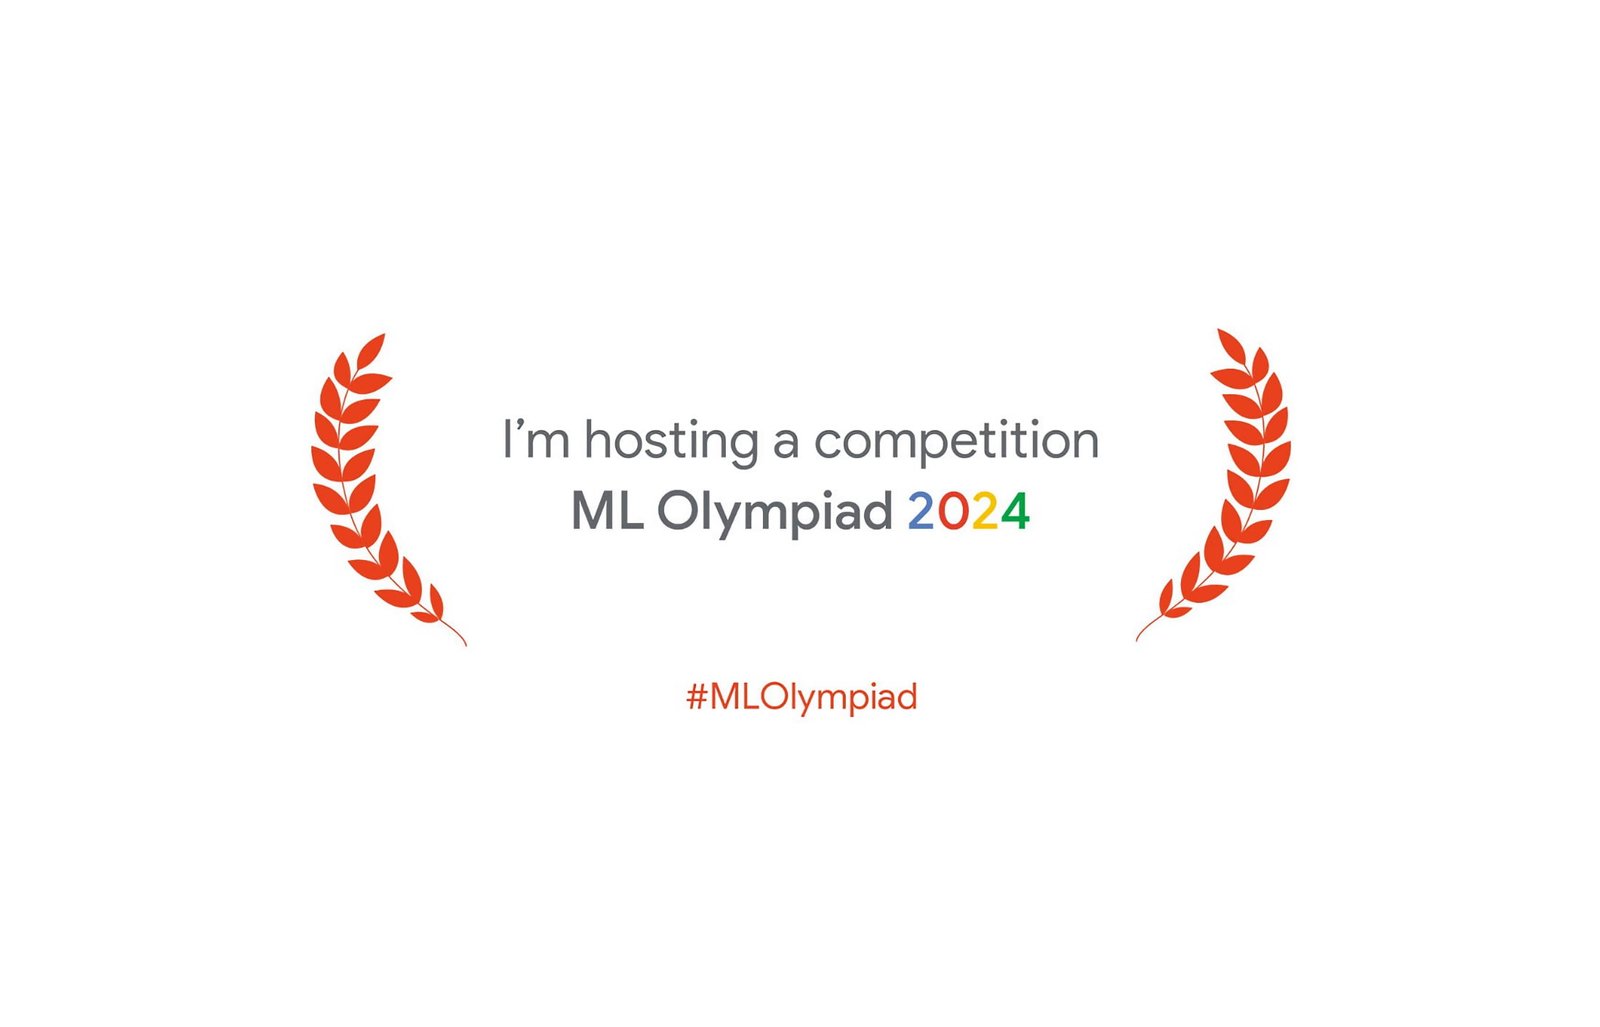 ML Olympiad returns with over 20 challenges